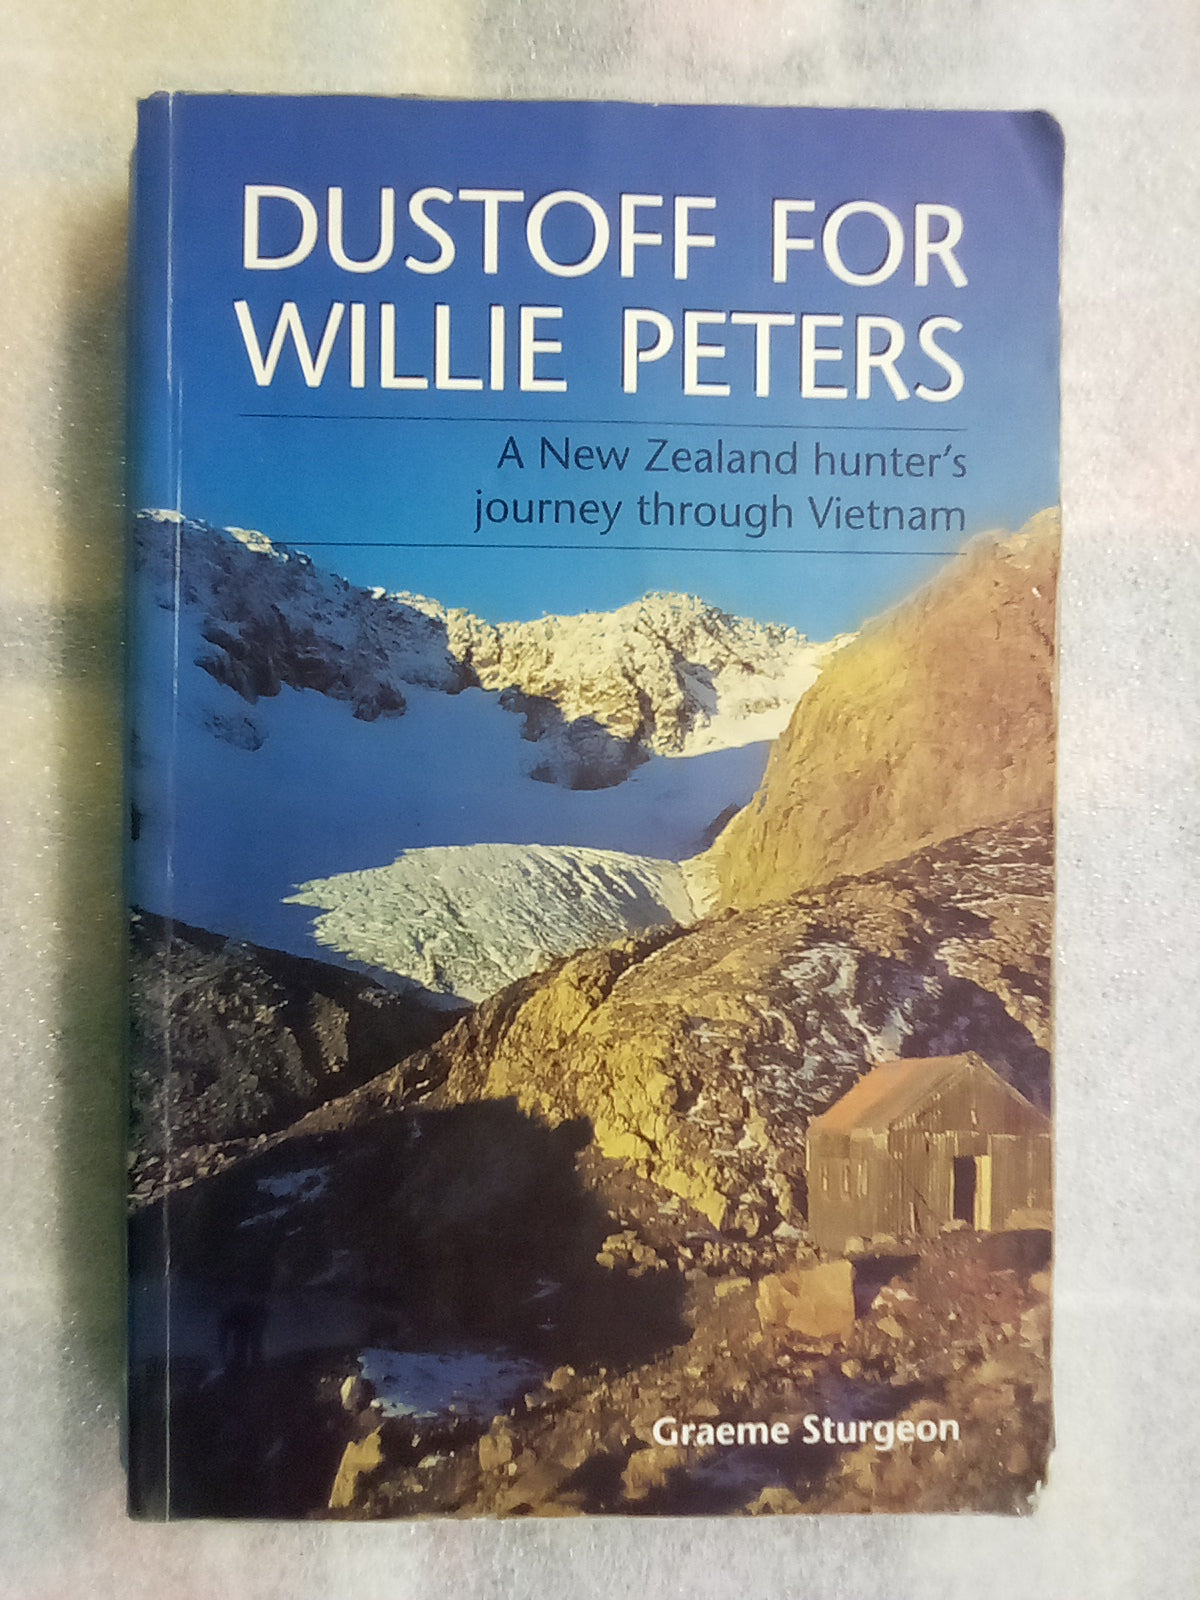 Dustoff for Willie Peters - A NZ Hunters Journey Through Vietnam